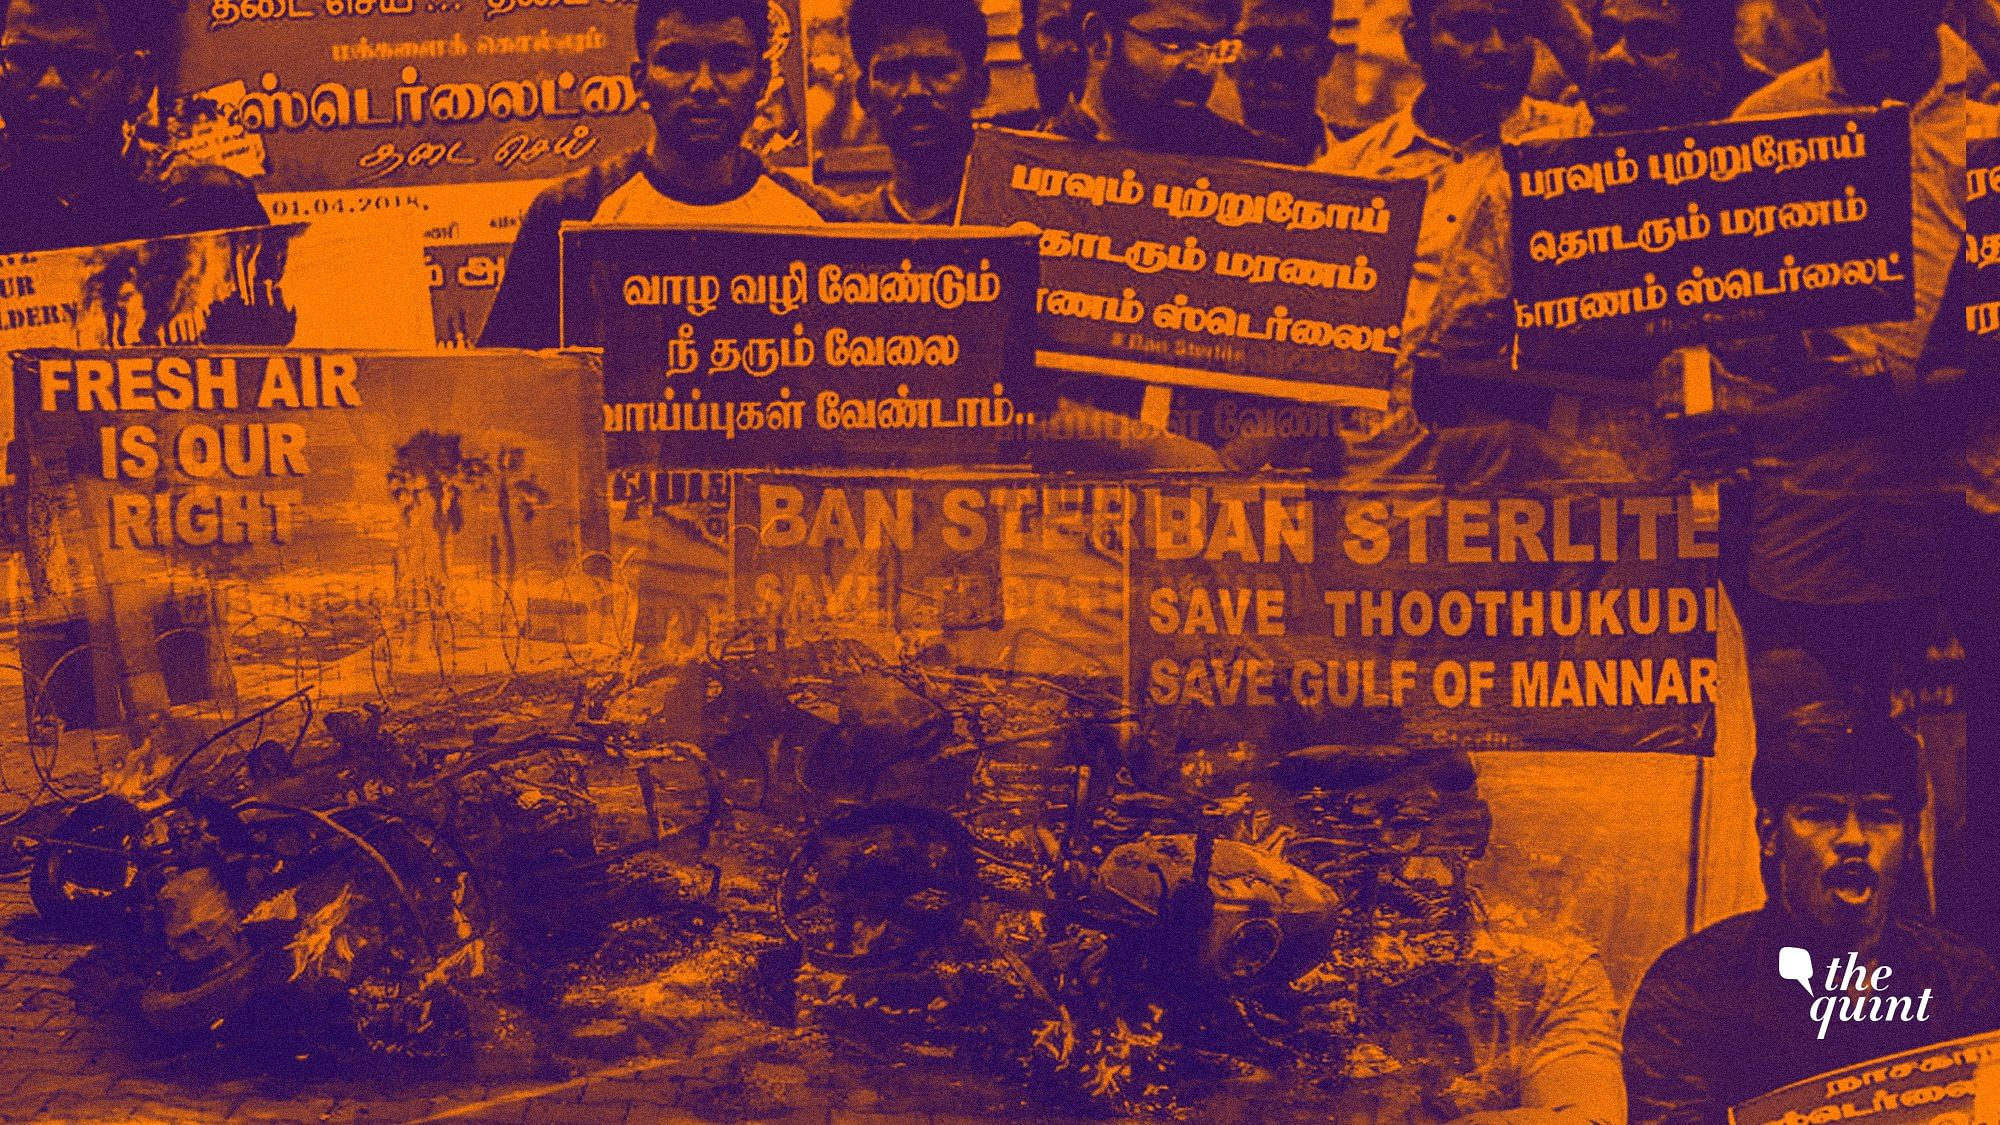 The Madurai bench of the Madras High Court has passed an interim order in connection with allegations of Sterlite operating a second unit in Tuticorin.